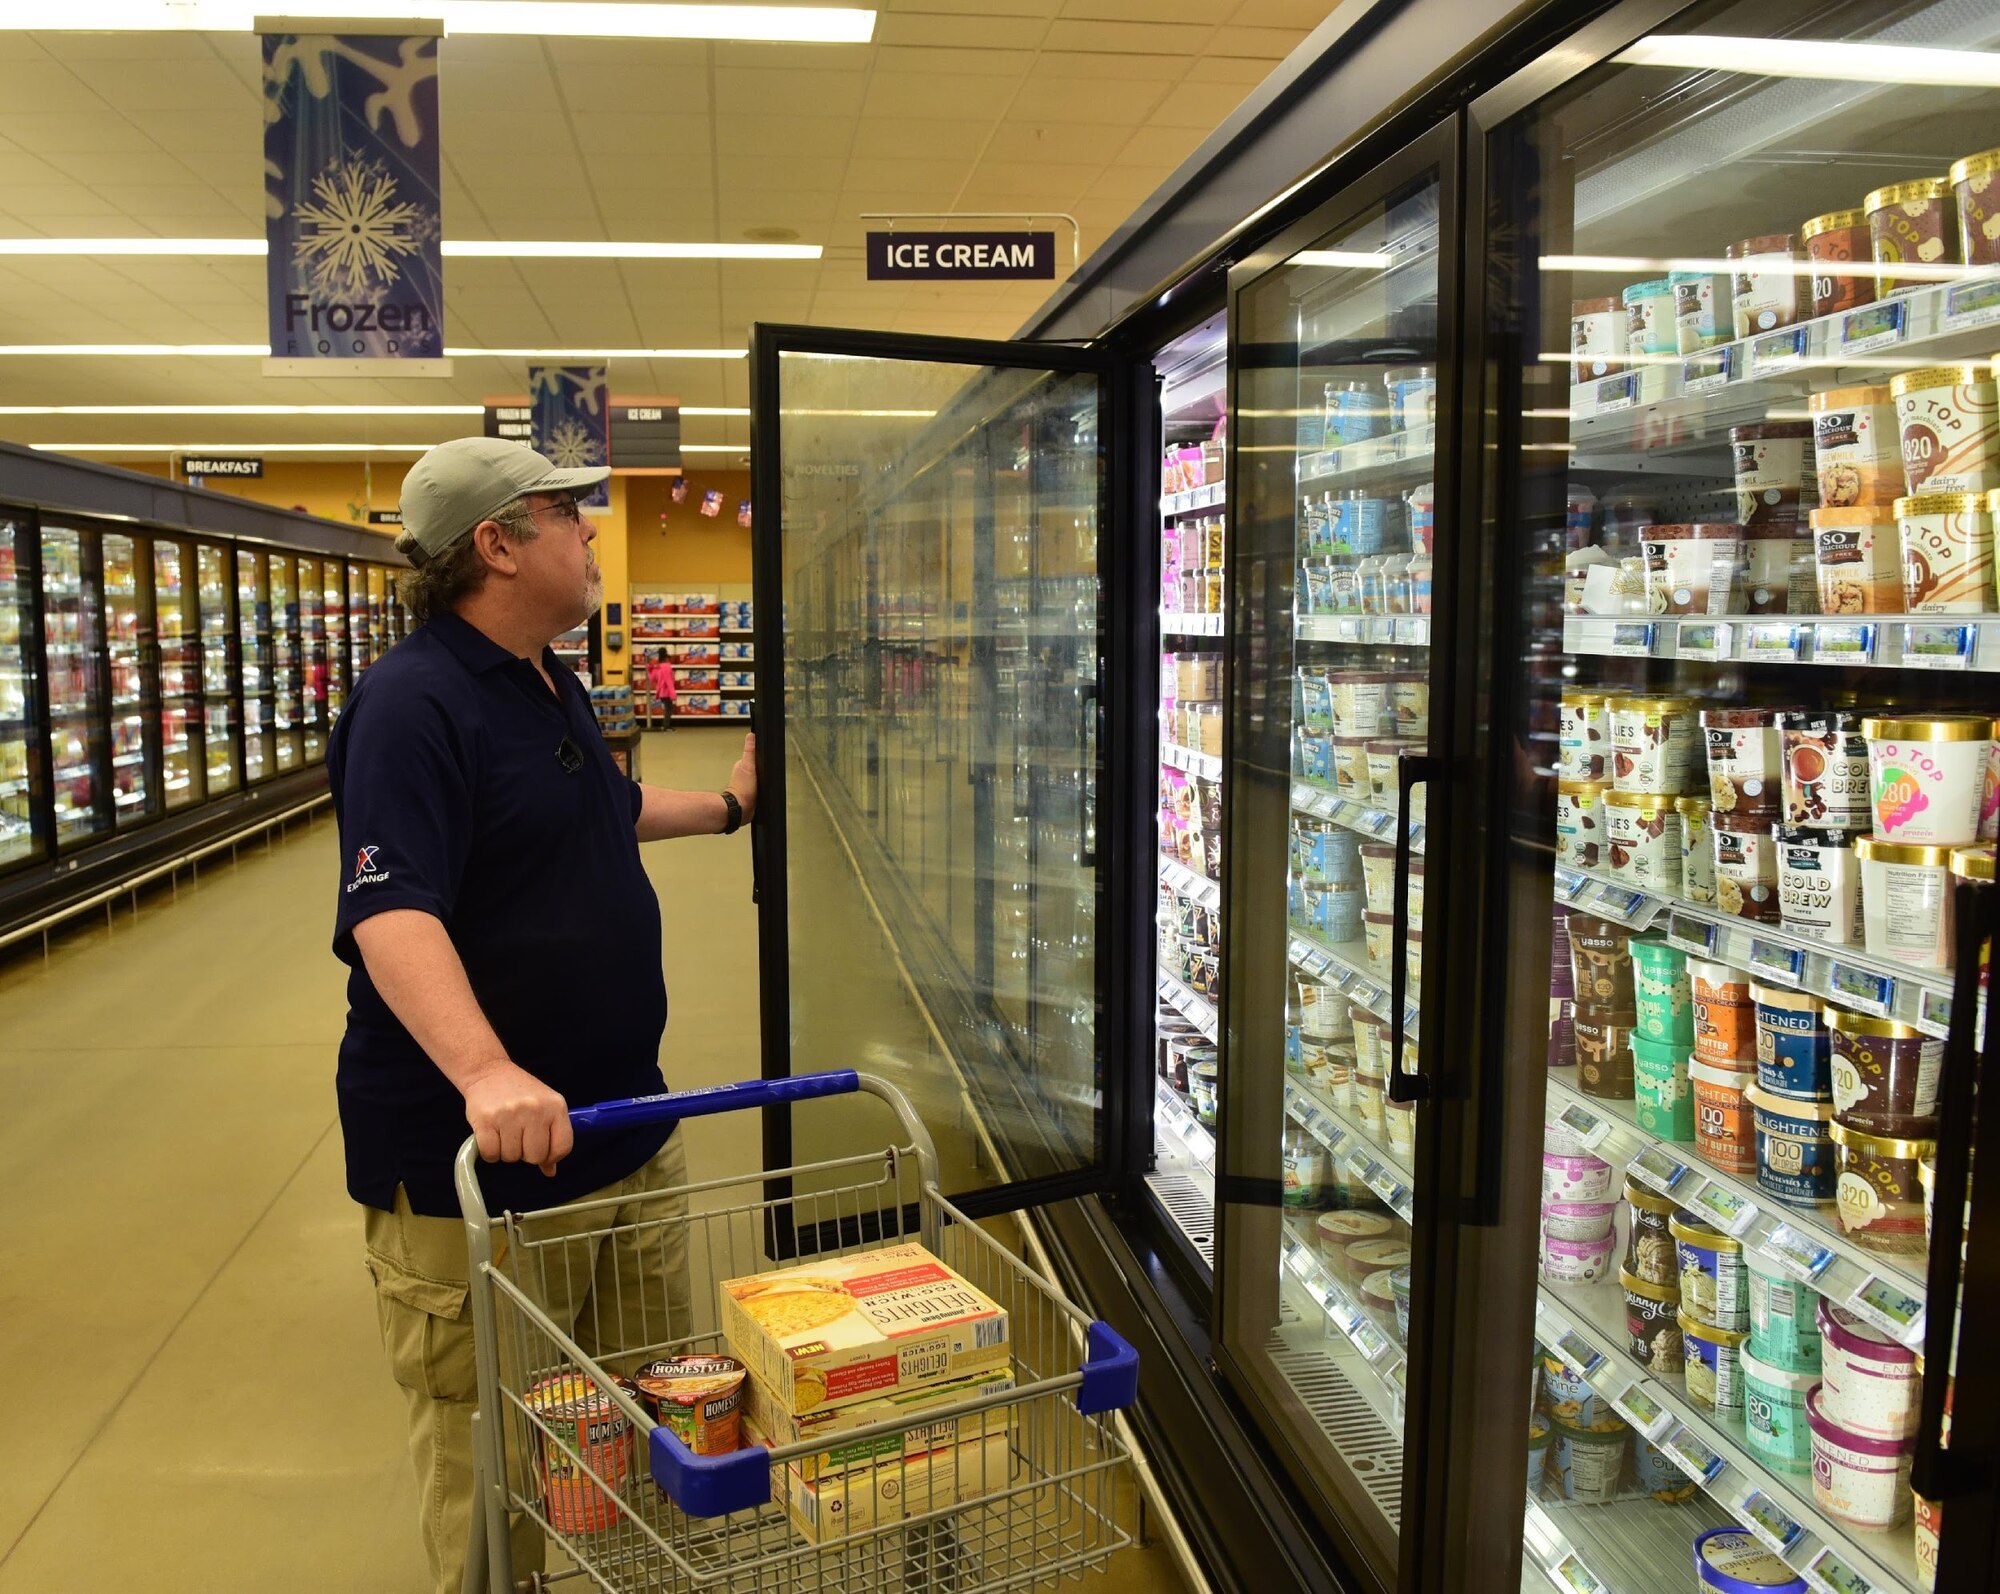 A customer checks out the newly stocked chilled items Nov. 19, 2018, at the Tyndall Air Force Base Commissary. Several customer-service organizations reopened Nov. 17 for DOD ID cardholders to utilize. Many services on Tyndall were temporarily shut down due to the damage from Hurricane Michael. (U.S. Air Force photo by Senior Airman Cody R. Miller)